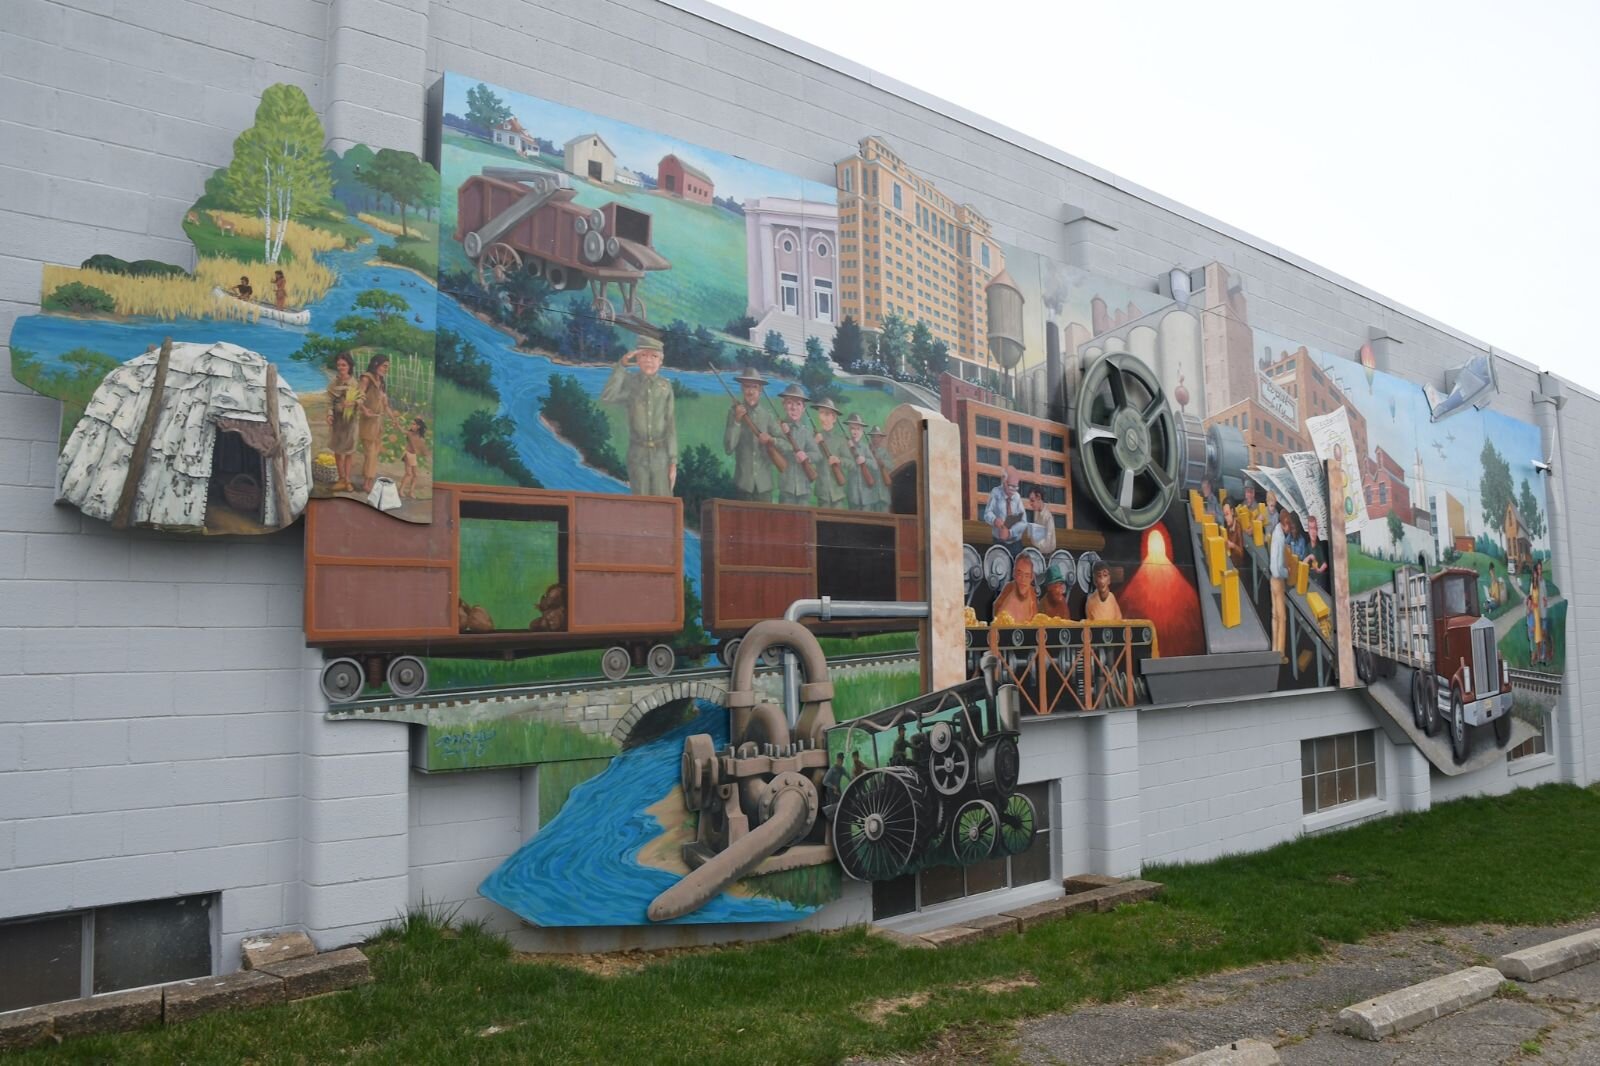 A mural, donated by Battle Creek Unlimited, depicts the history of Battle Creek outside the Battle Creek Regional History Museum.